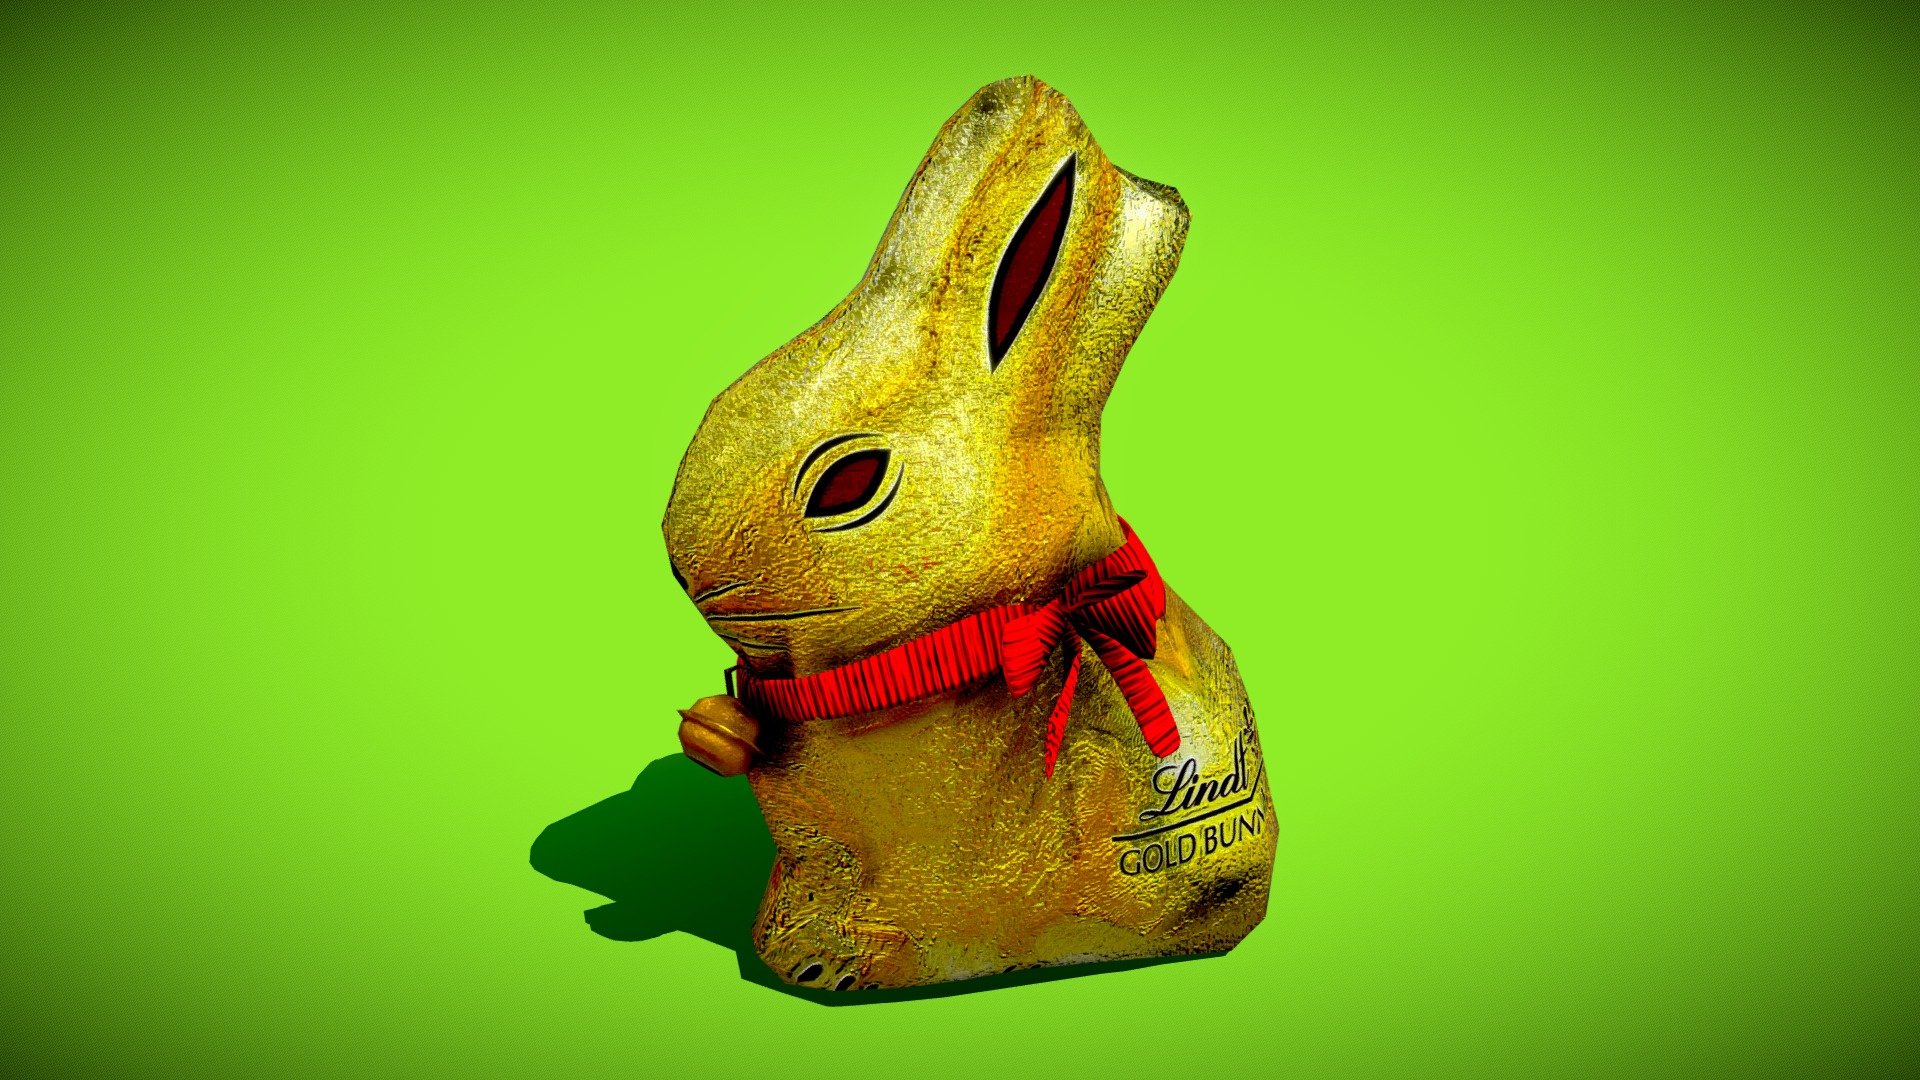 A Lindt chocolate gold wrapped bunny made using Blender 2.79 and the Cycles render engine.

Check out my blog at: https://rhcreations.tumblr.com/ - Lindt Gold Easter Bunny - Download Free 3D model by rhcreations 3d model